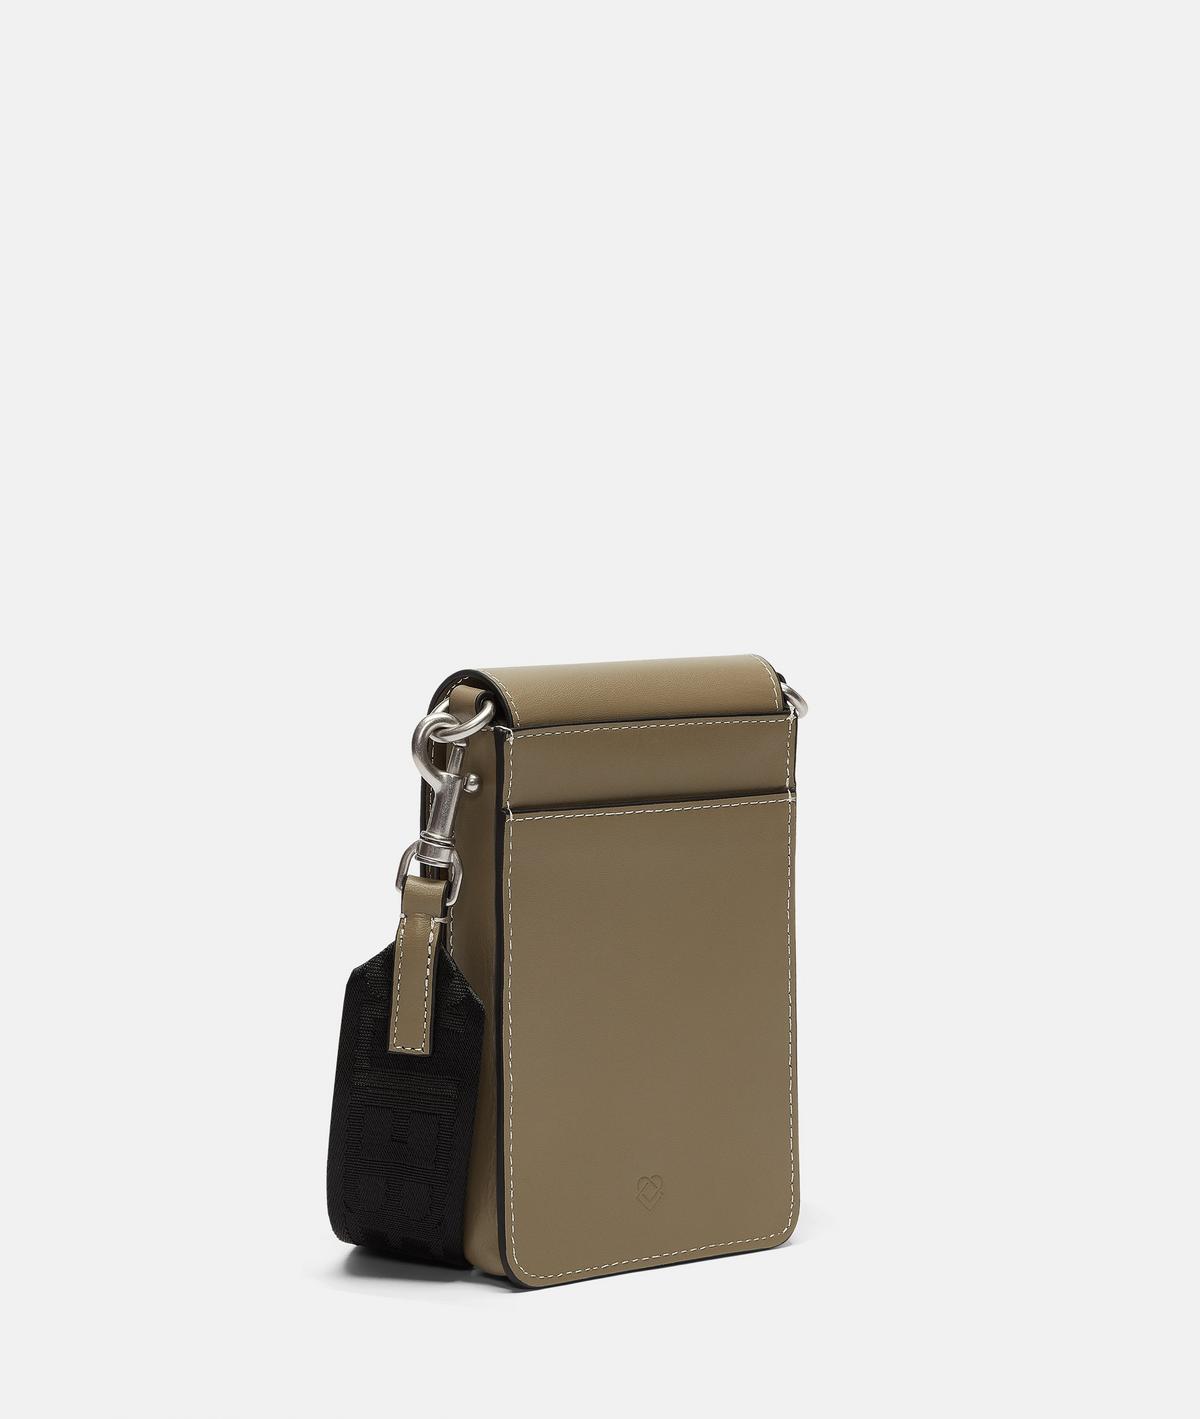 LIEBESKIND BERLIN Pam Mobile Pouch